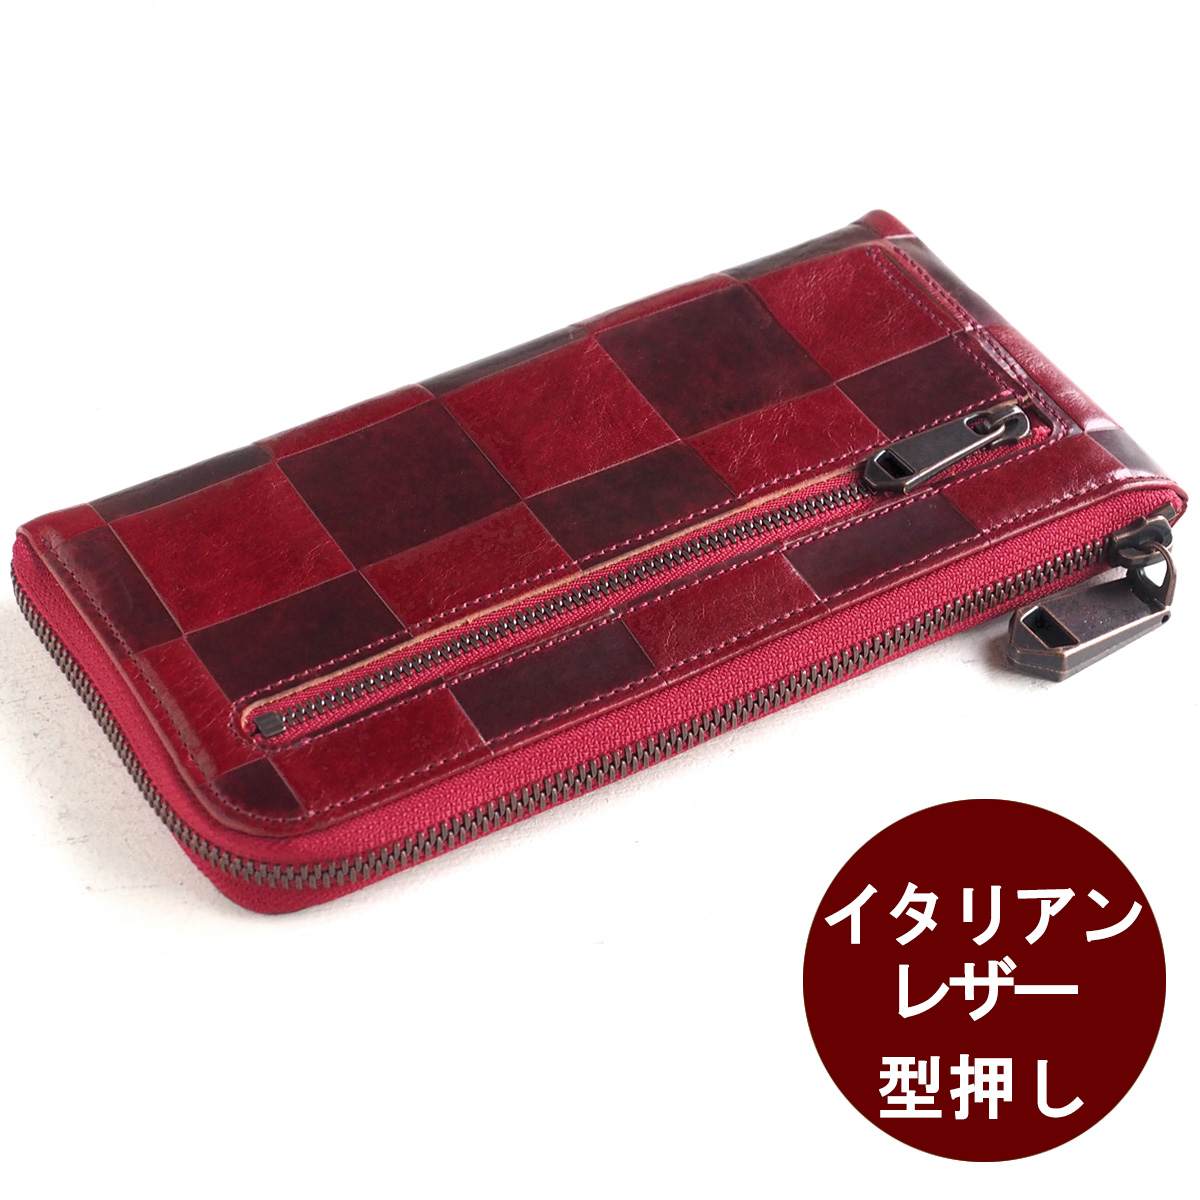 L-shaped zipper long wallet<!--nl-->Italian leather embossed block check pattern red